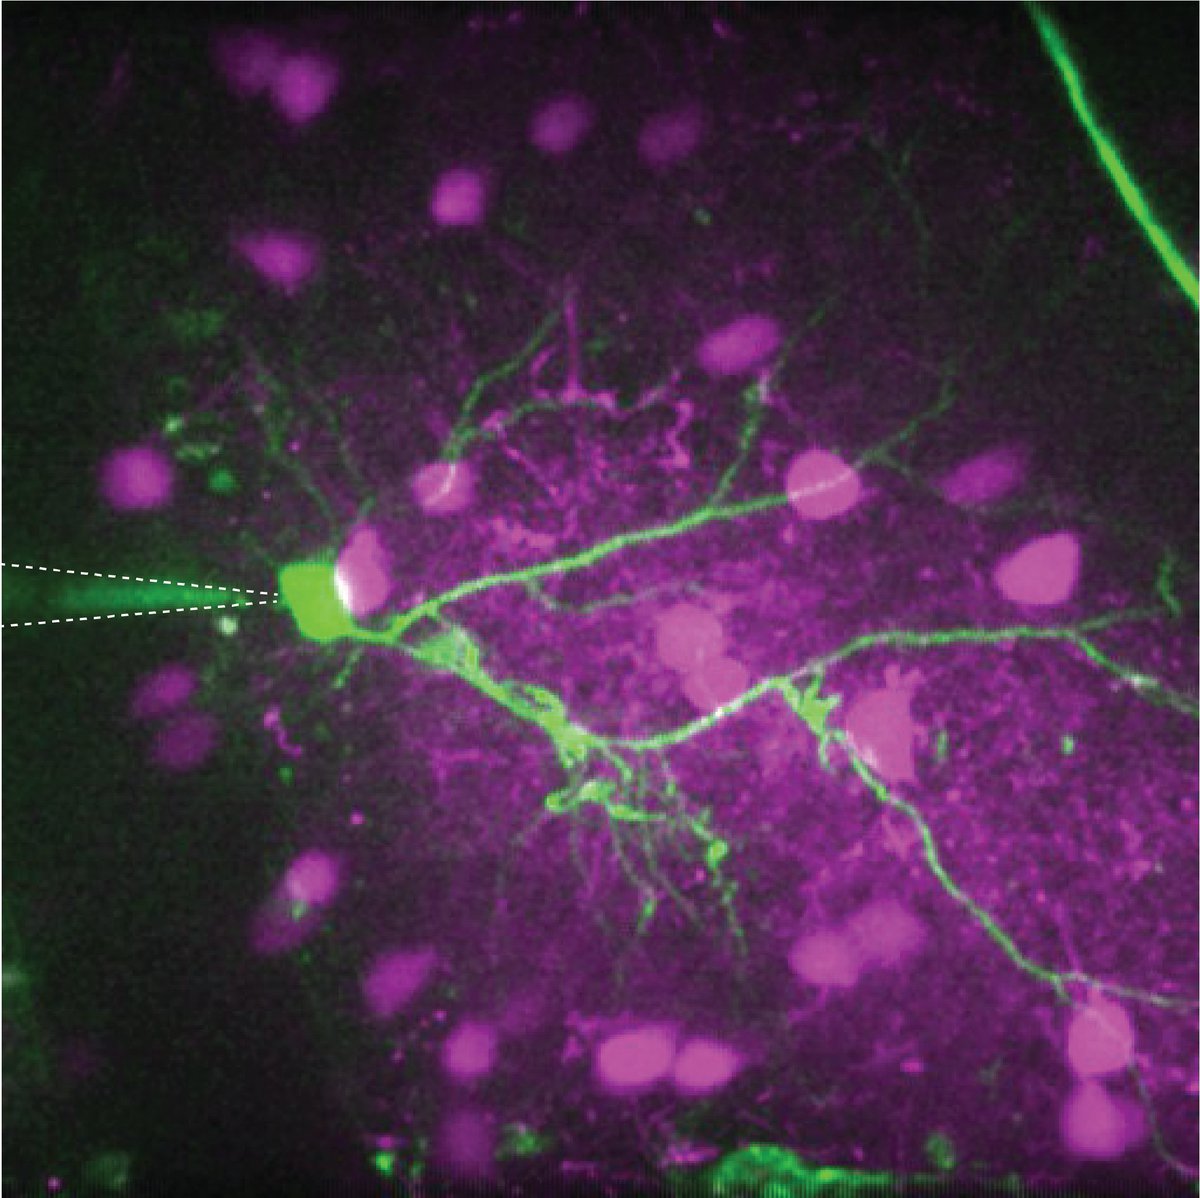 For today's #FluorescenceFriday: L2/3 pyramidal neuron (green) in mouse barrel cortex, filled through a patch pipette during an in vivo (awake) WC recording, surrounded by tdTomato-expressing PV interneurons (magenta).